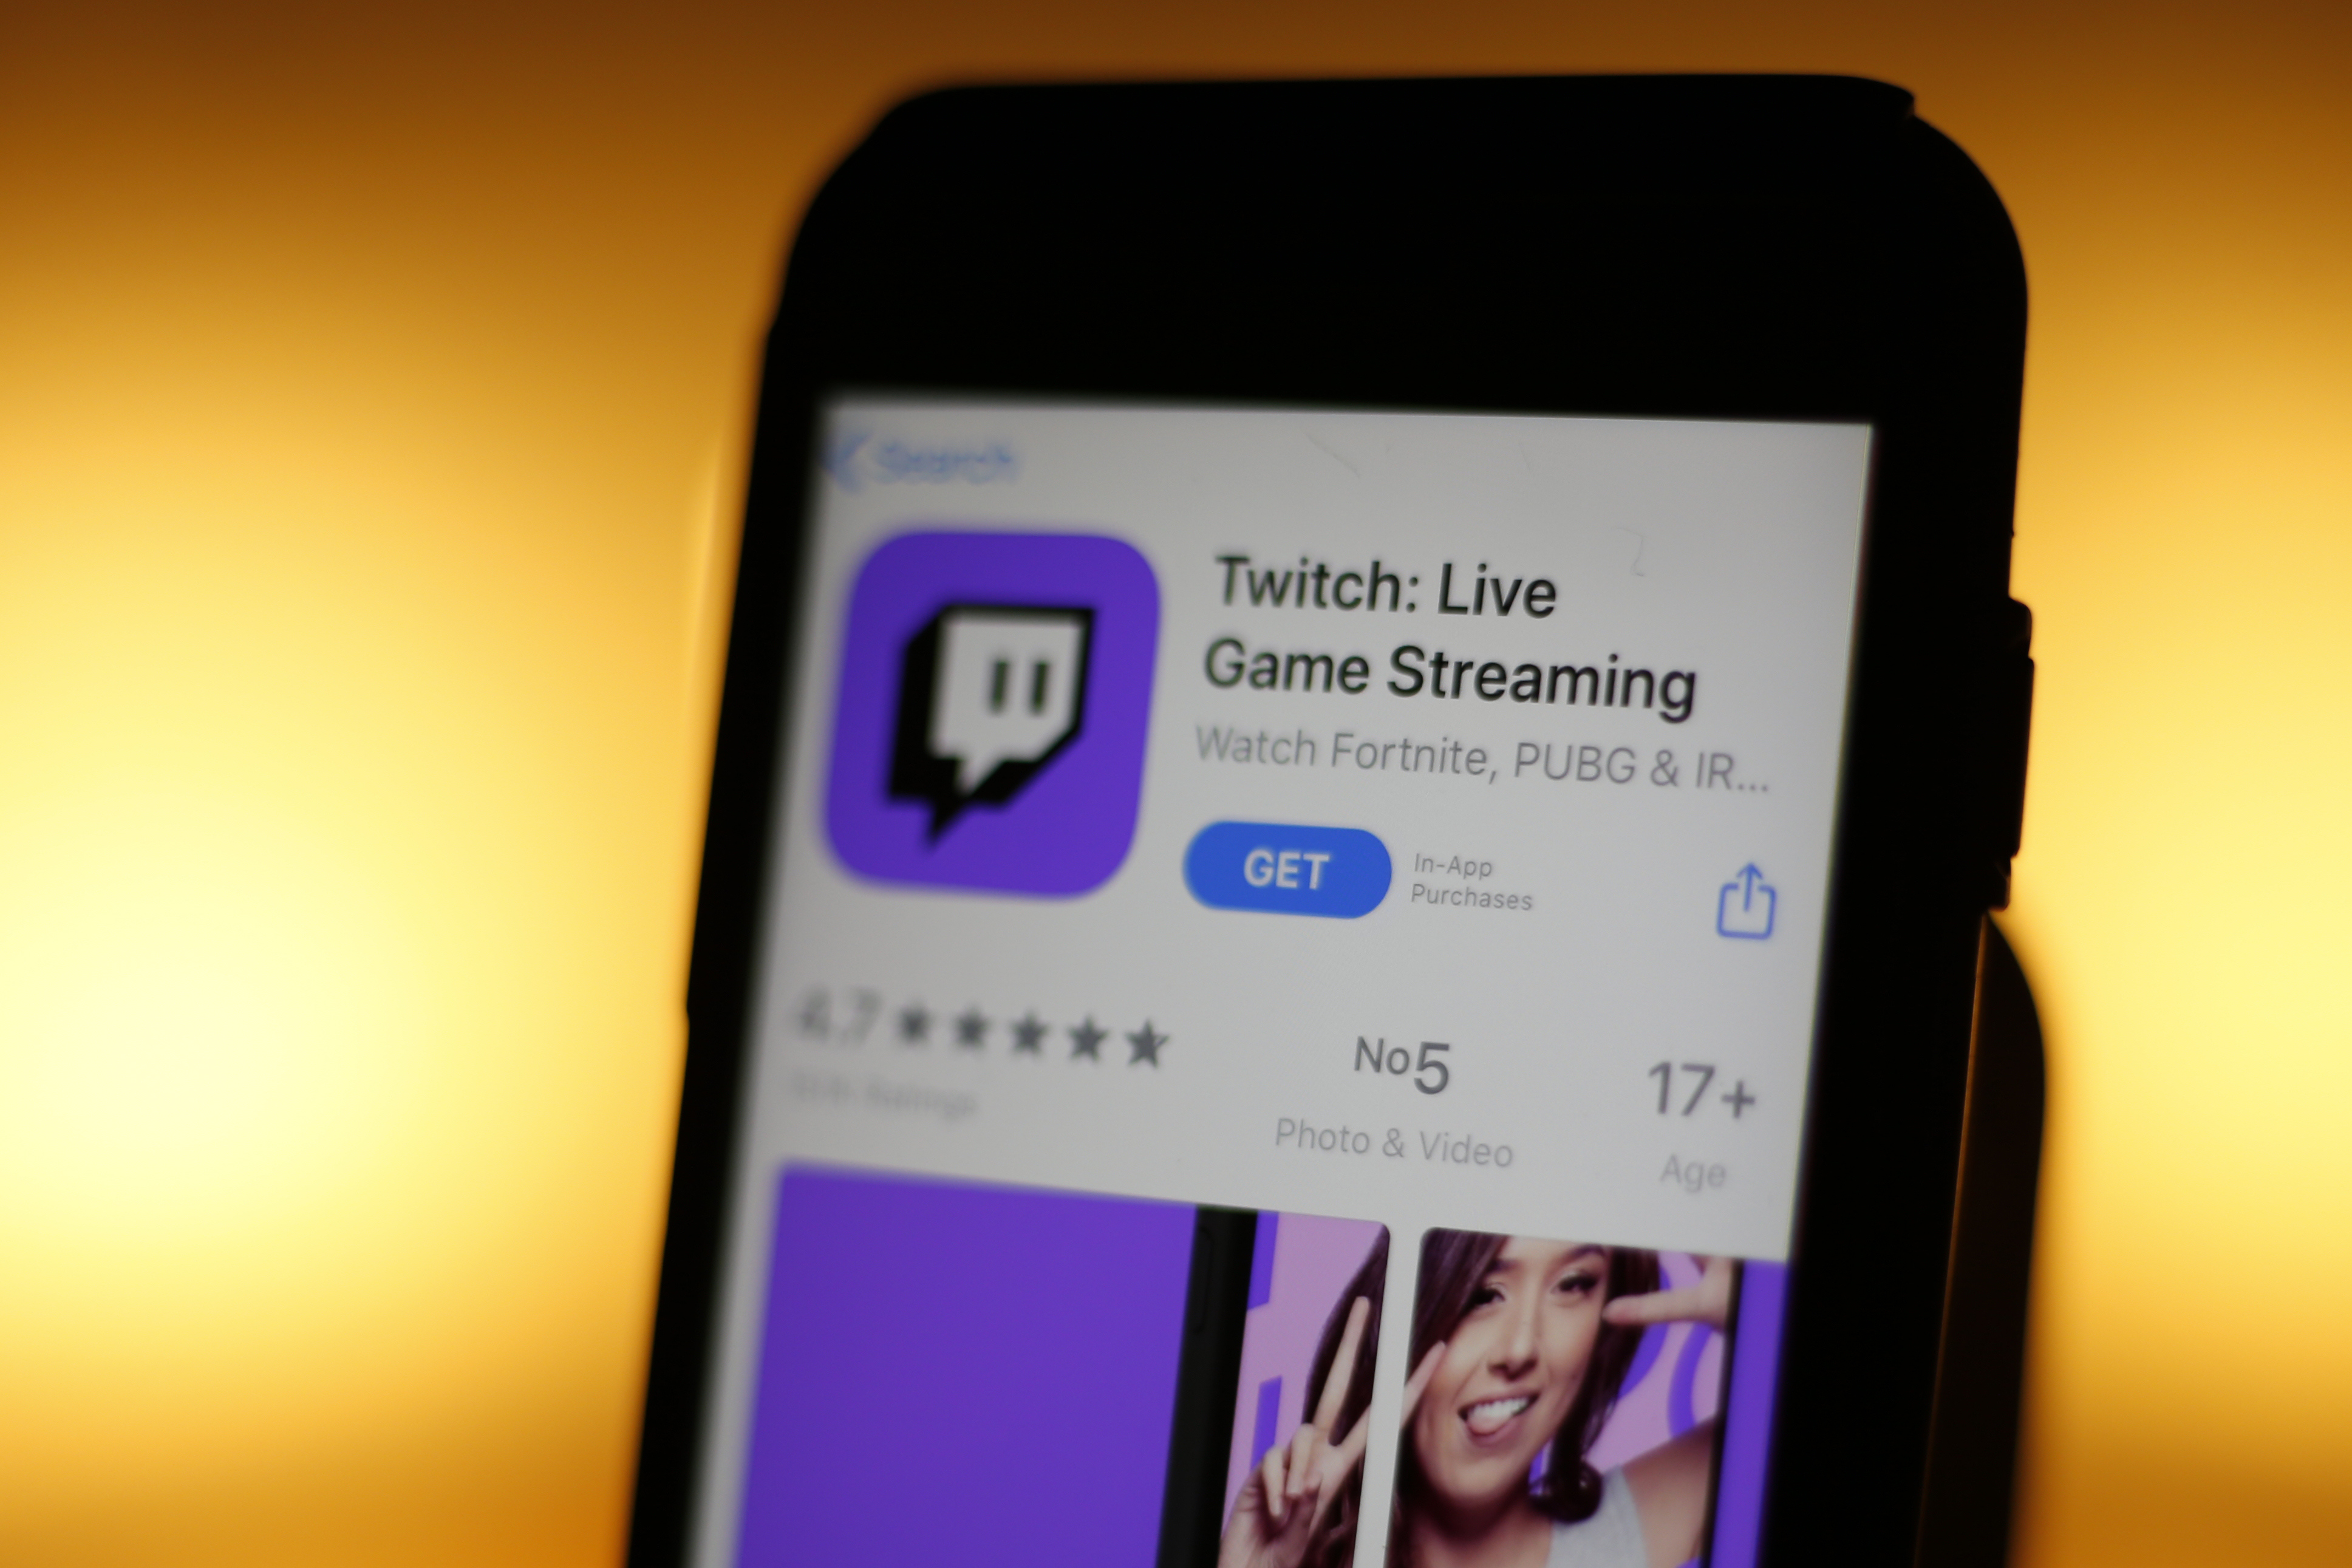 Image of a smartphone displaying the Apple Inc. App Store page for the Twitch streaming app.